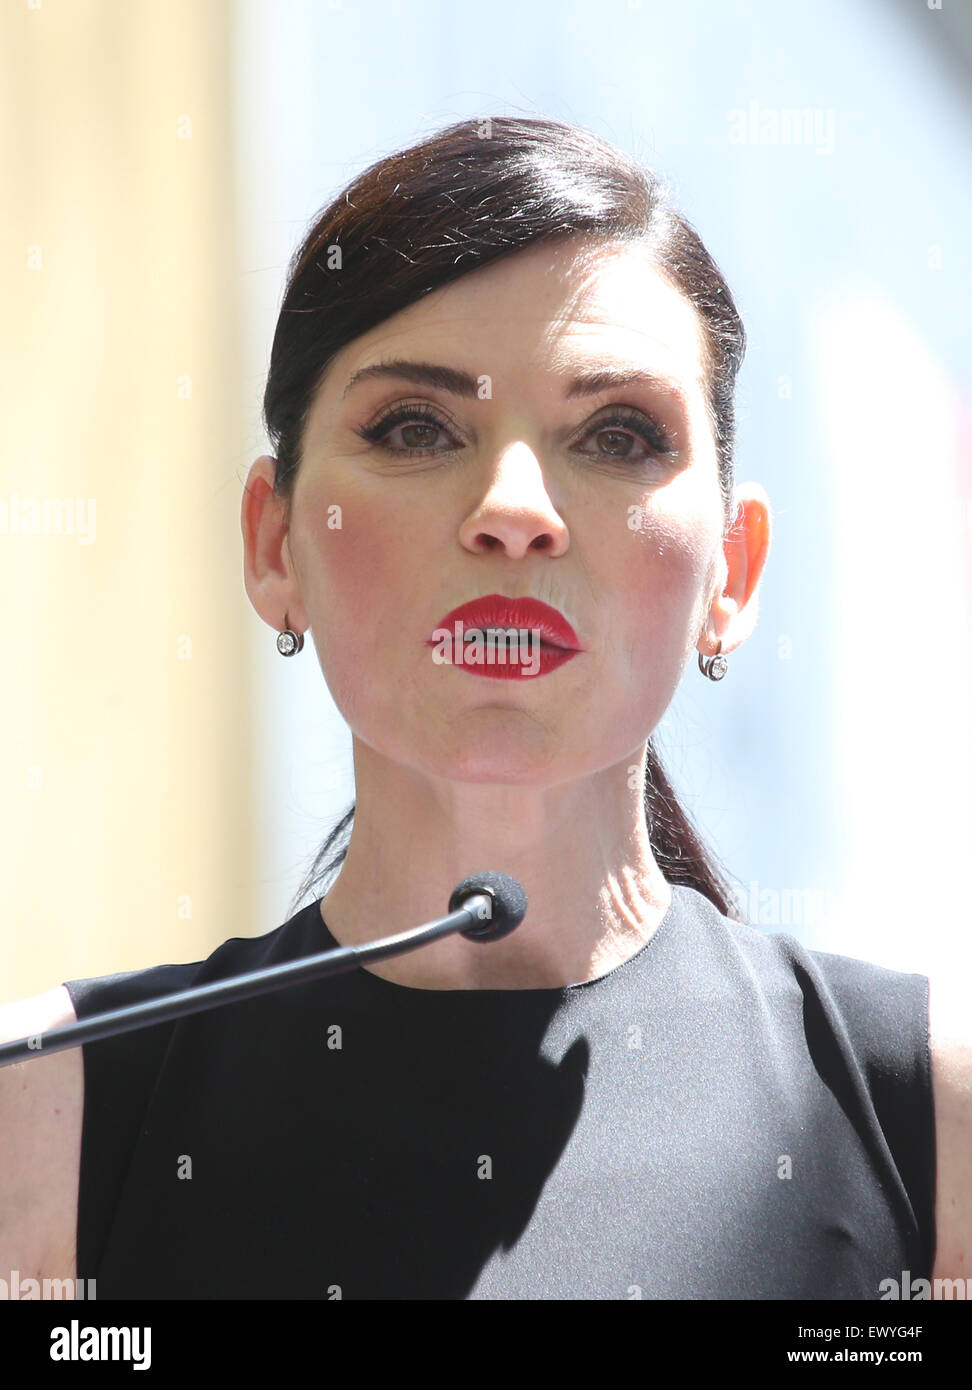 Julianna Margulies honored with a star on the Hollywood Walk of Fame  Featuring: Julianna Margulies Where: Hollywood, California, United States When: 01 May 2015 C Stock Photo